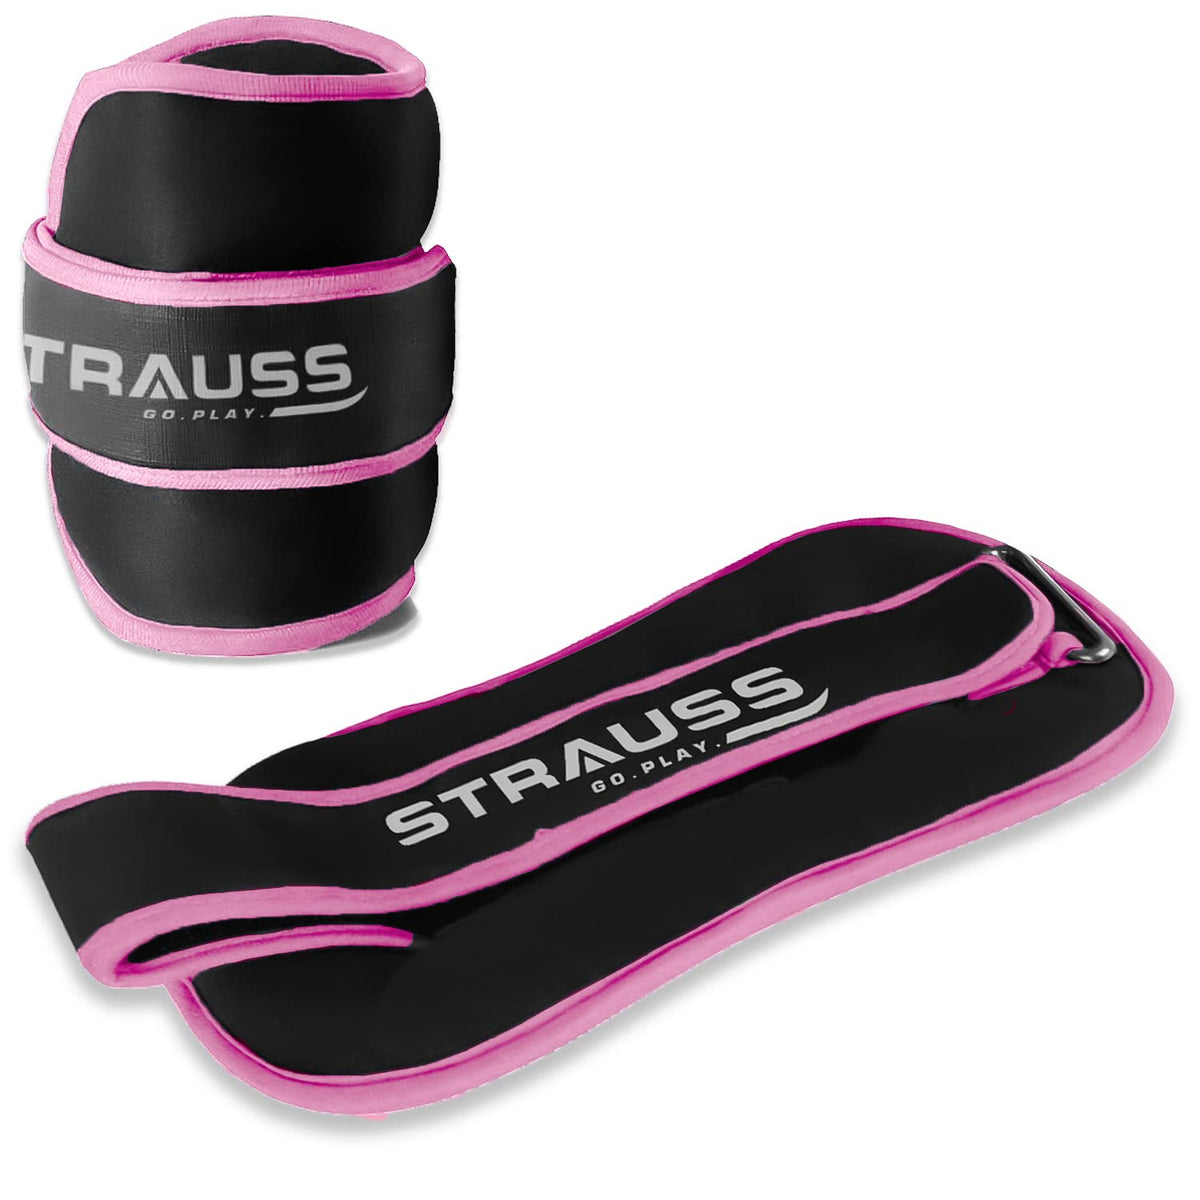 Strauss Round Shape Adjustable Ankle Weight/Wrist Weights 2 KG X 2 | Ideal for Walking, Running, Jogging, Cycling, Gym, Workout & Strength Training | Easy to Use on Ankle, Wrist, Leg, (Pink)